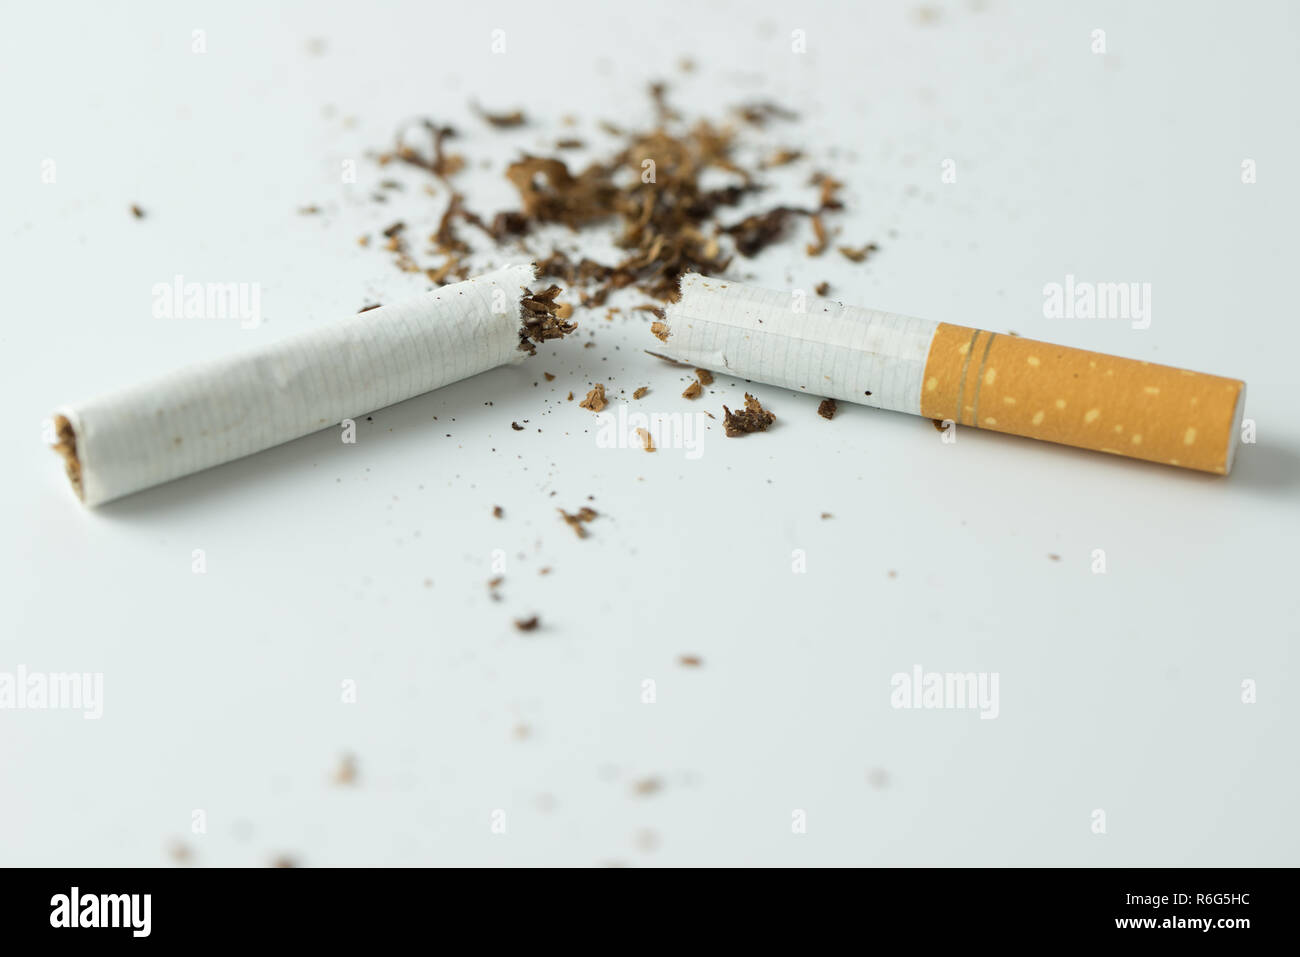 Quit smoking concept by breaking the cigarette Stock Photo